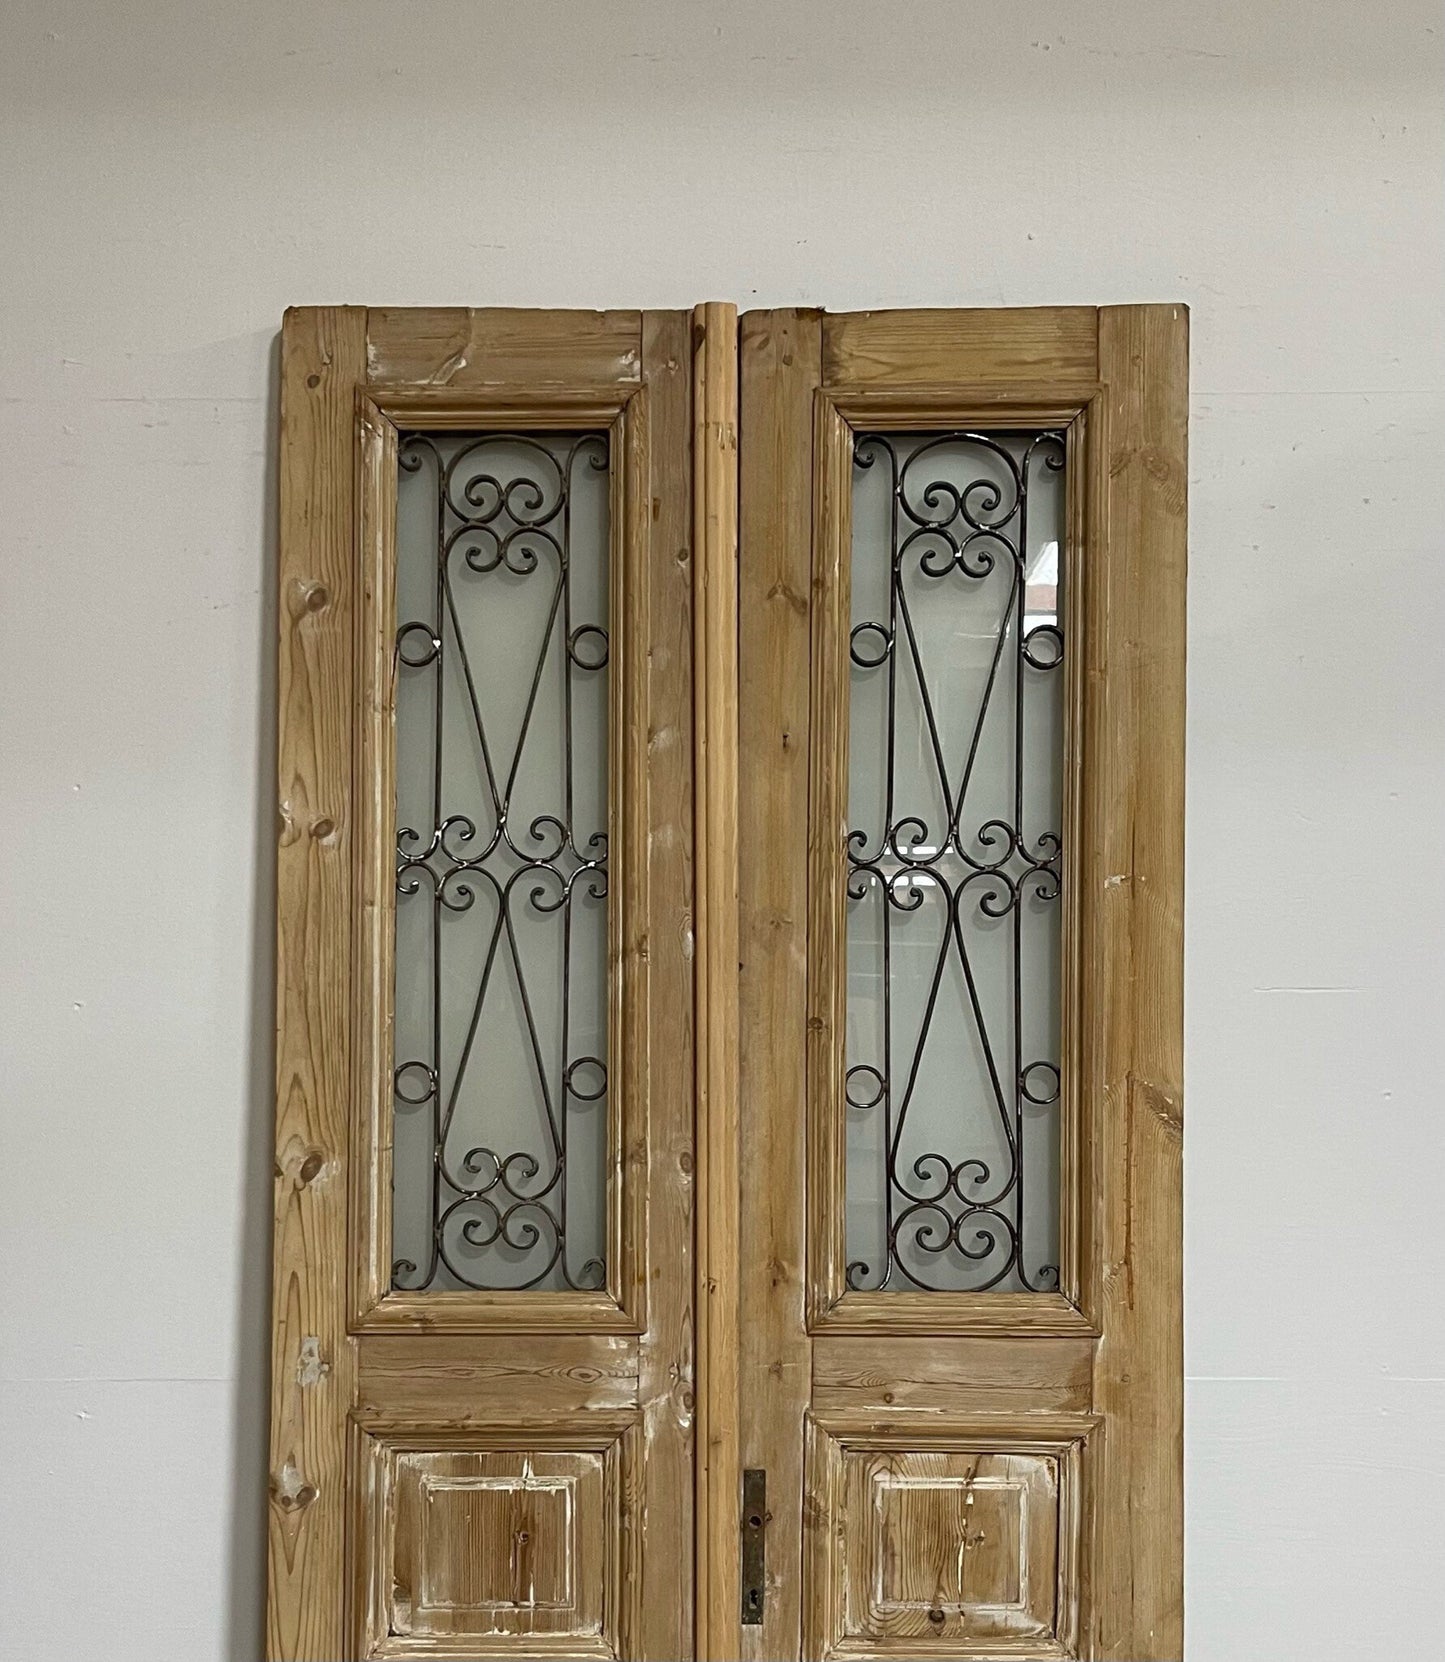 Antique French doors (99.5x42.75) with metal G0989